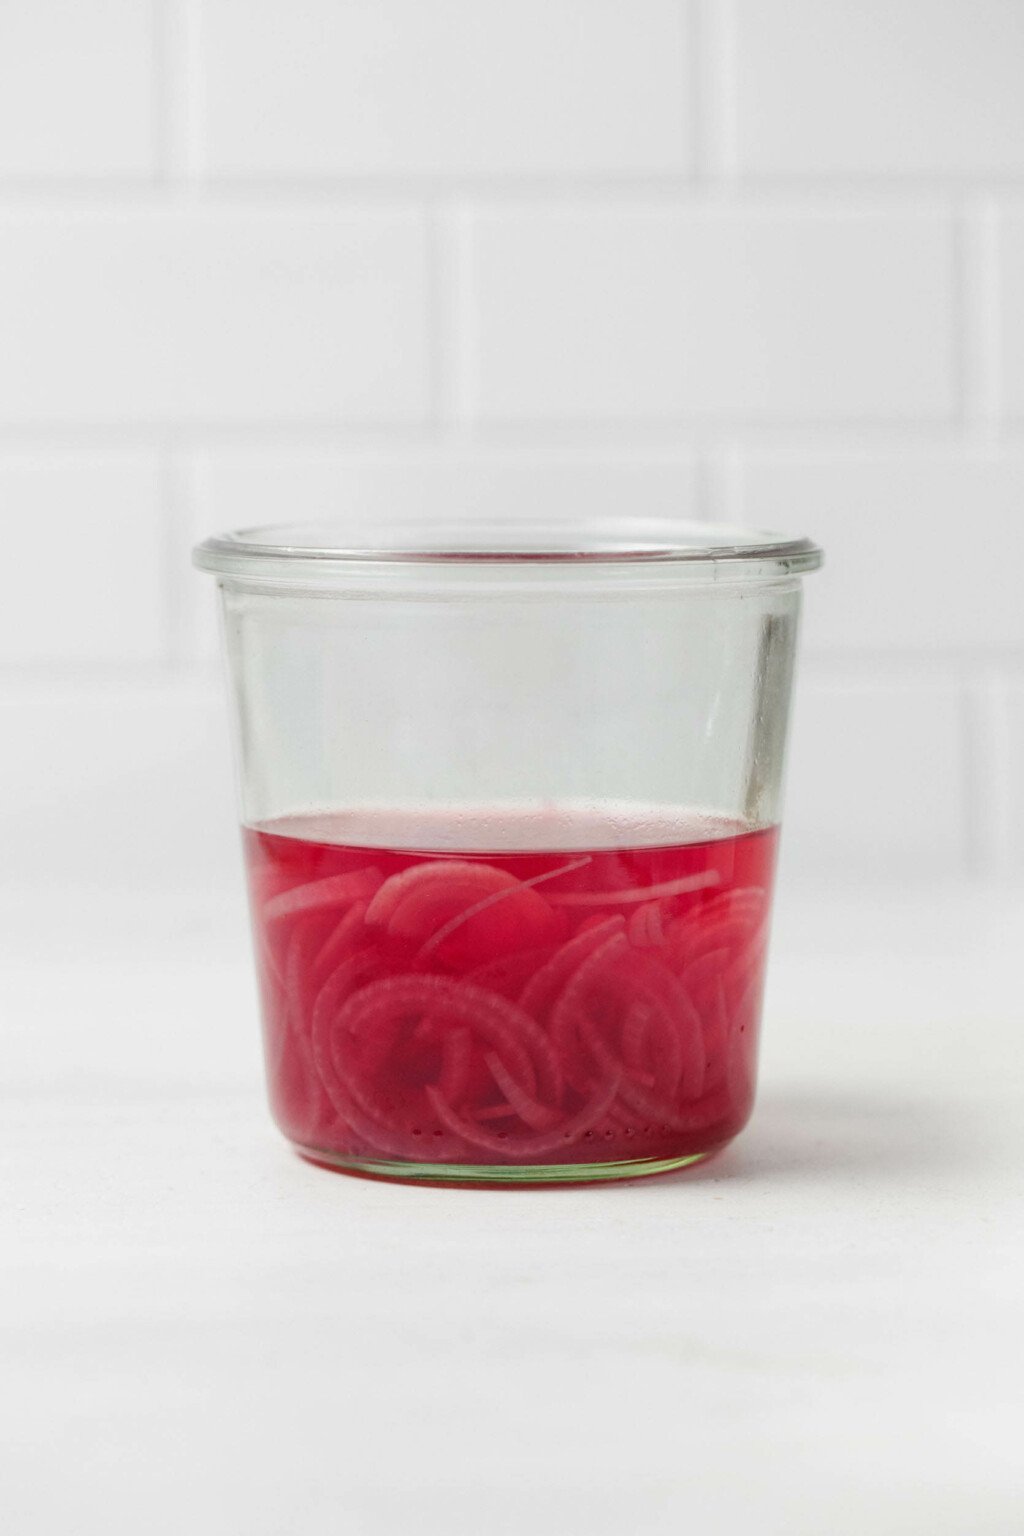 A mason jar contains bright pink, quick pickled red onions in brine.